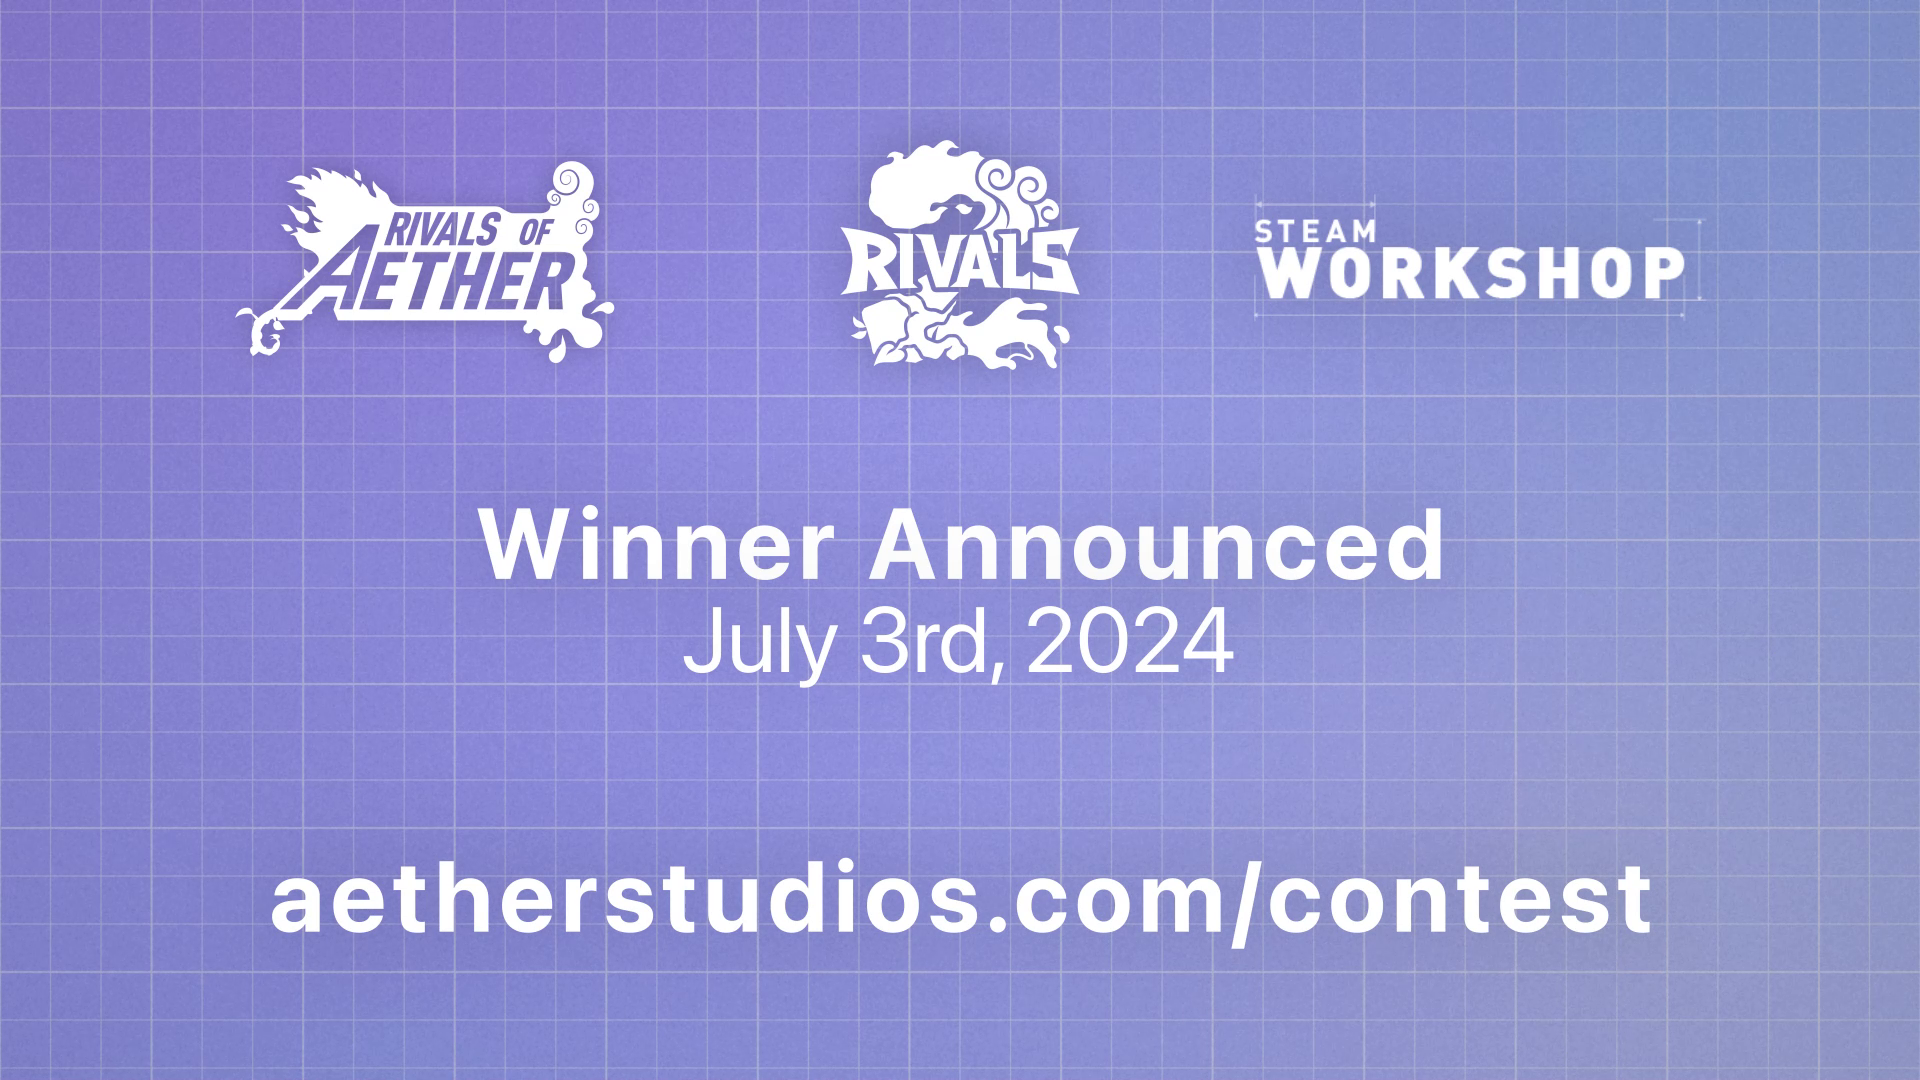 Workshop Contest winner announced July 3rd, 2024